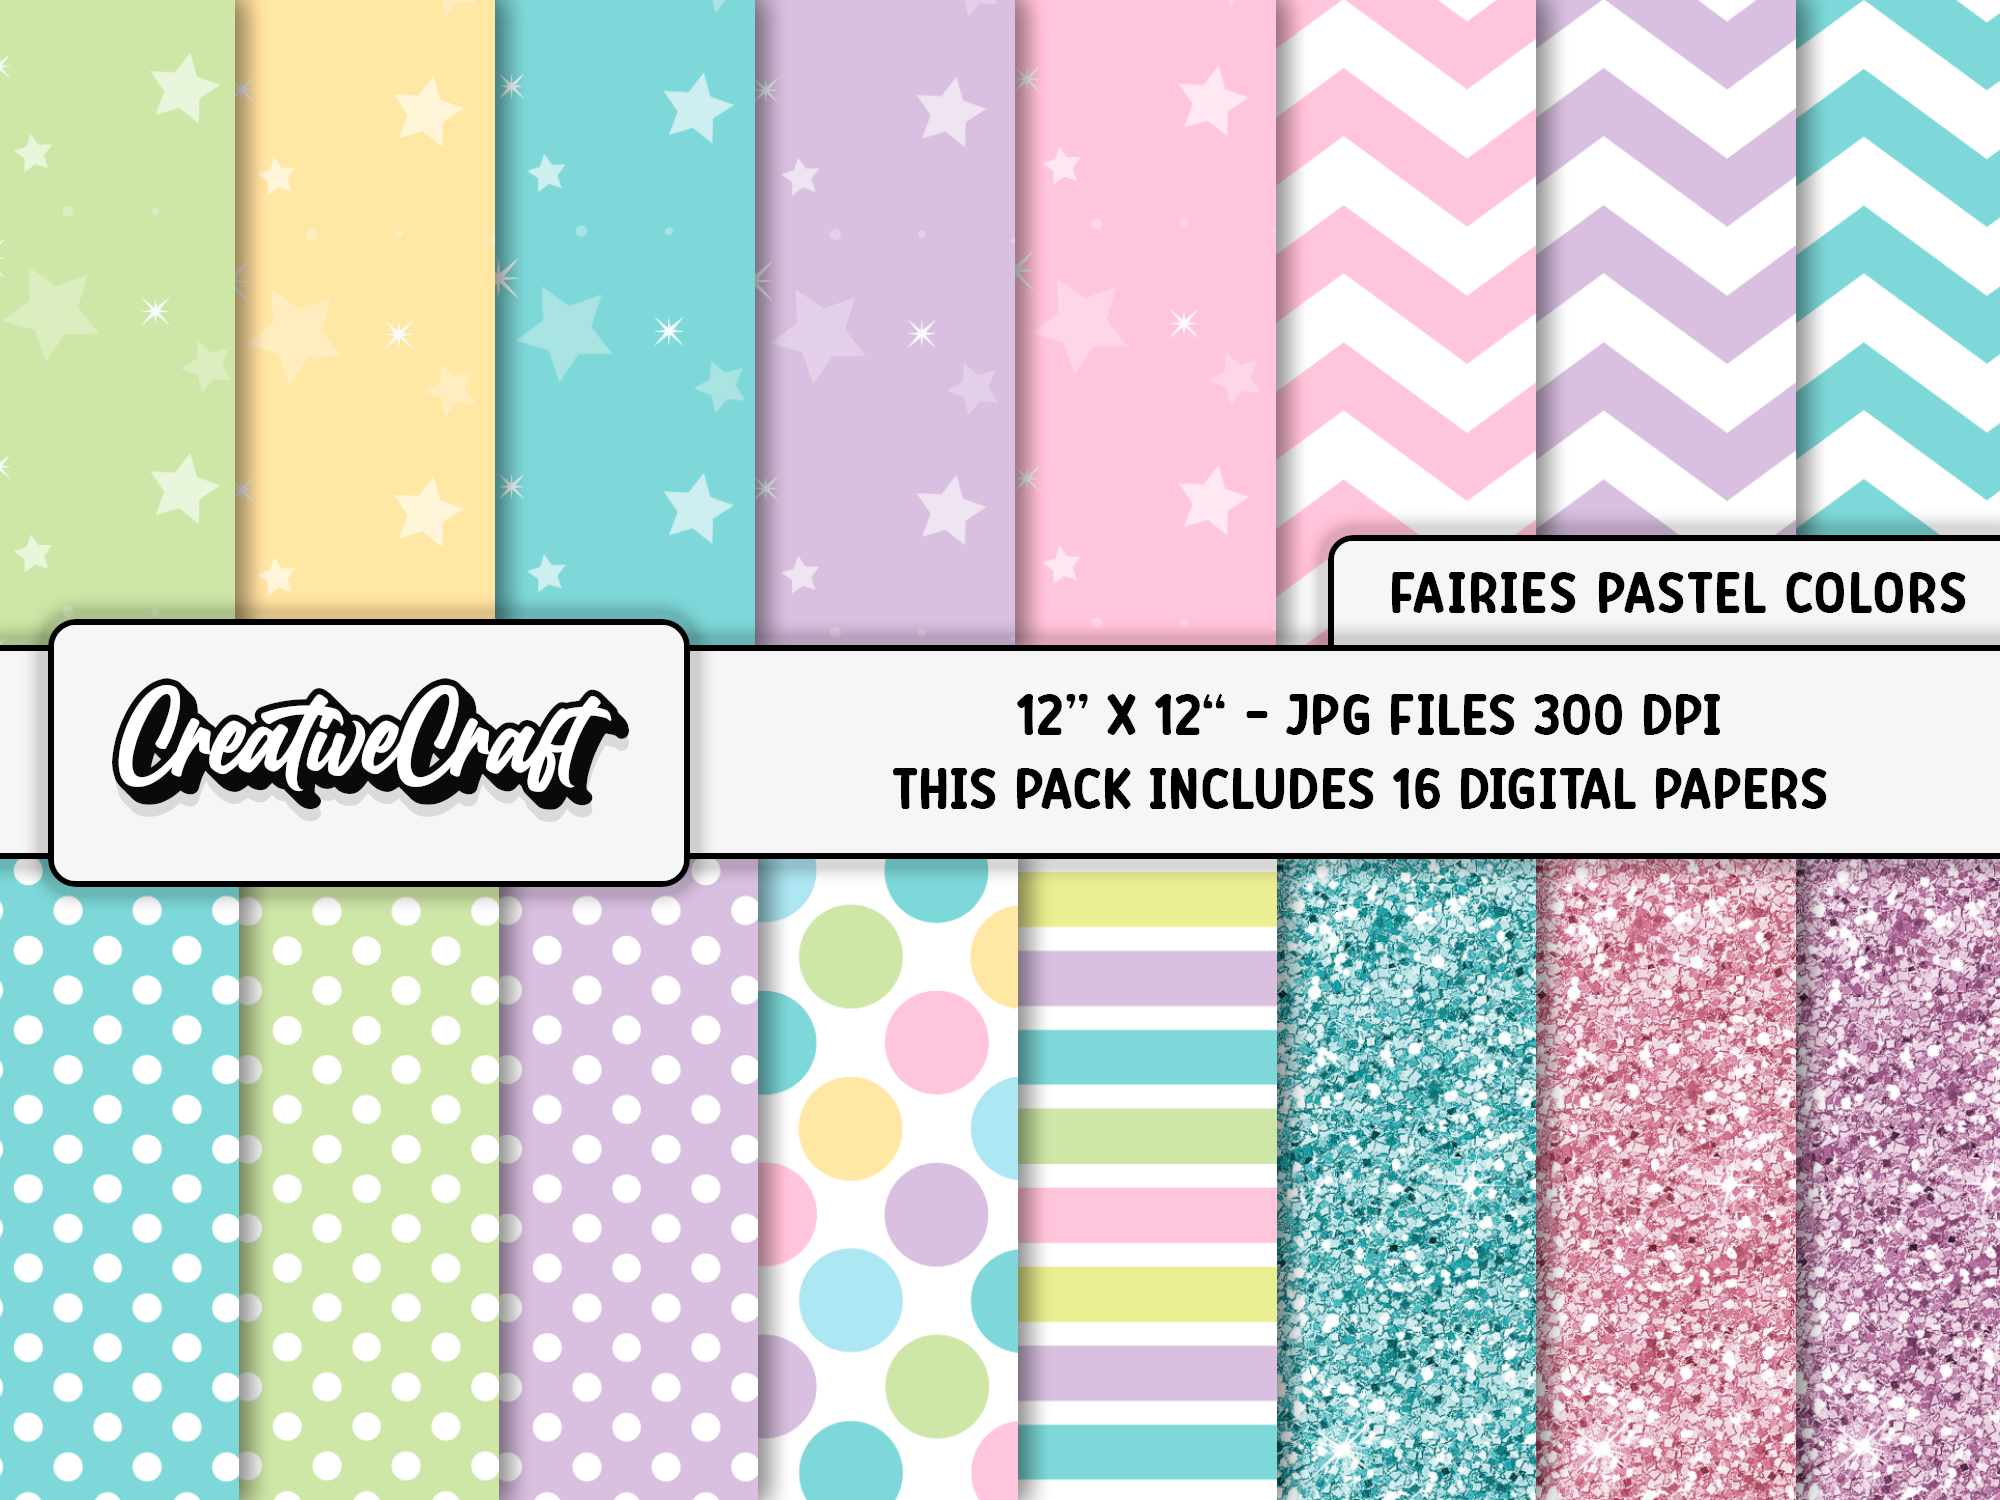 Fairies Pastel Colors Digital Papers Graphic by CreativeCraft ...